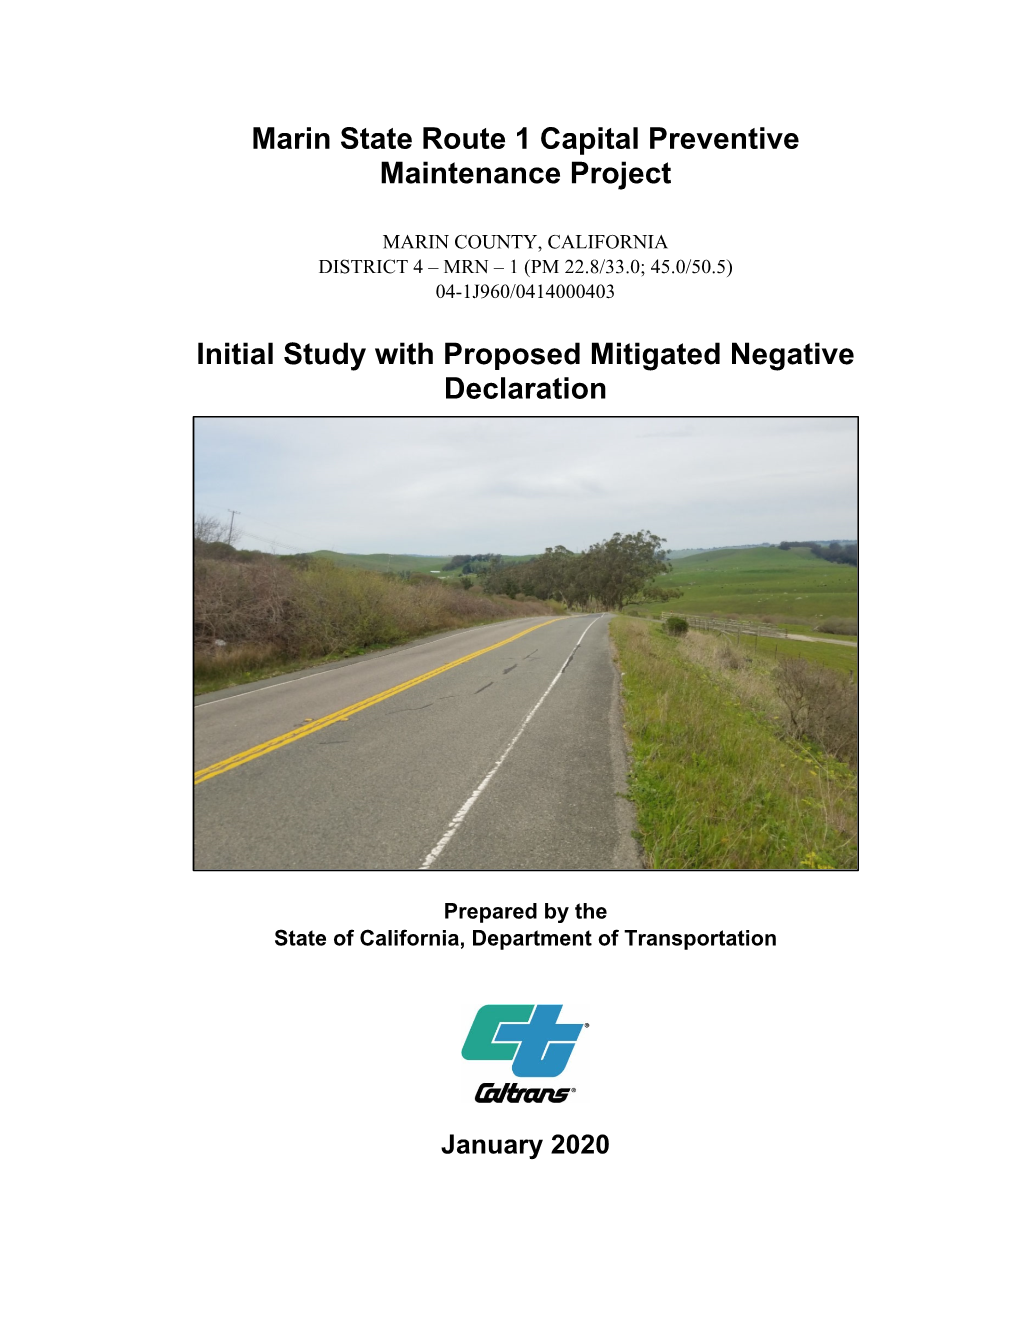 Marin State Route 1 Capital Preventive Maintenance Project